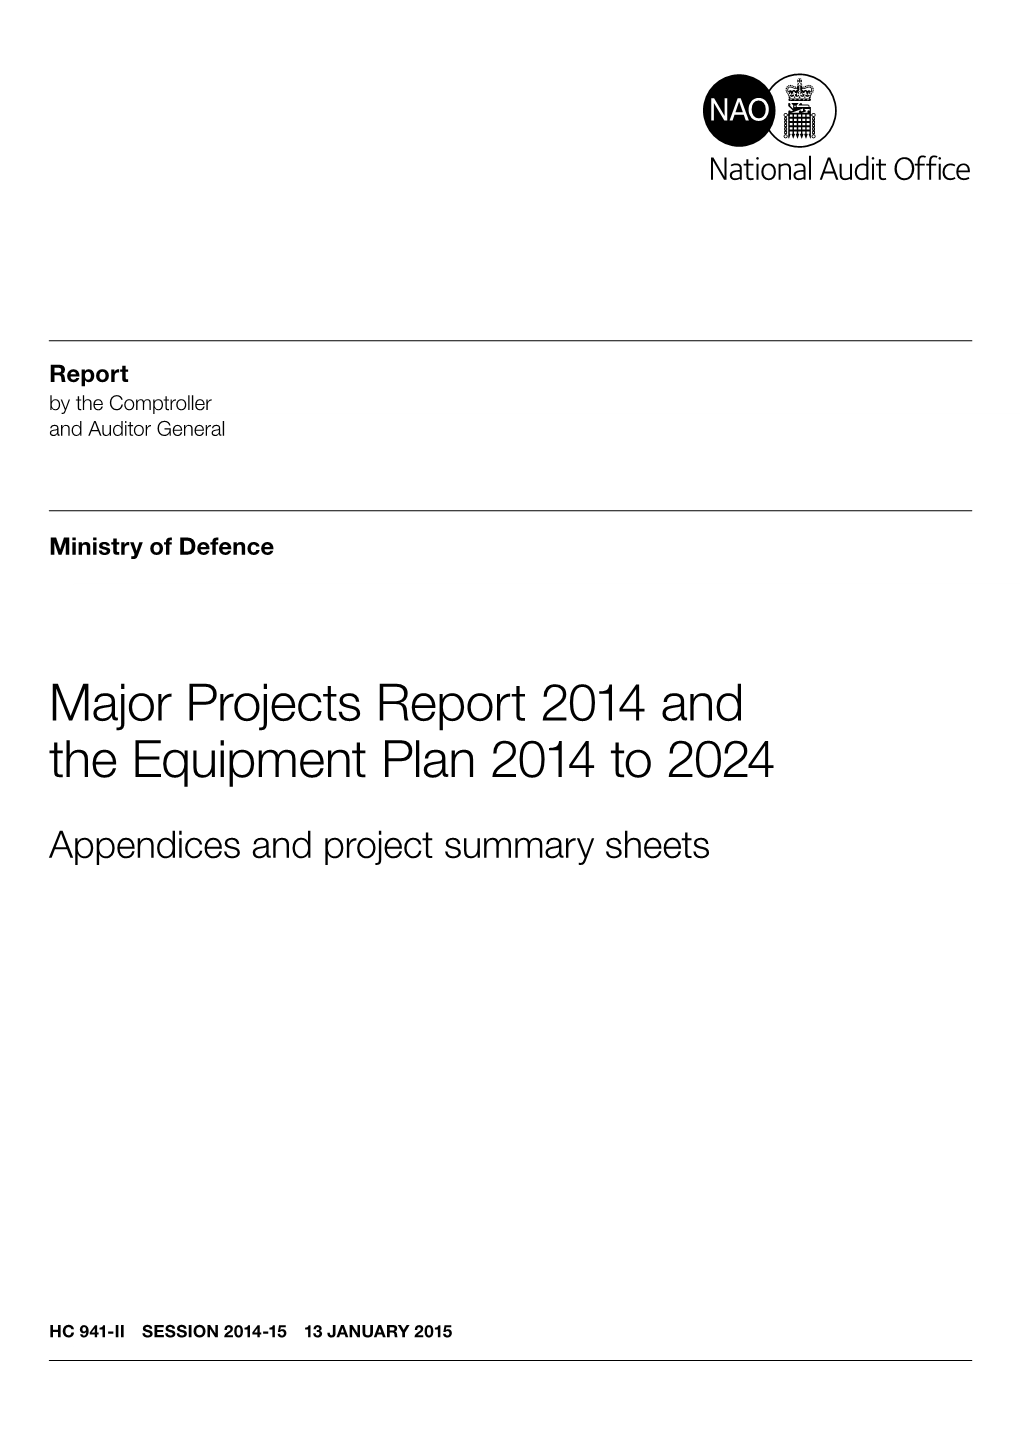 Major Projects Report 2014 Appendices and Project Summary